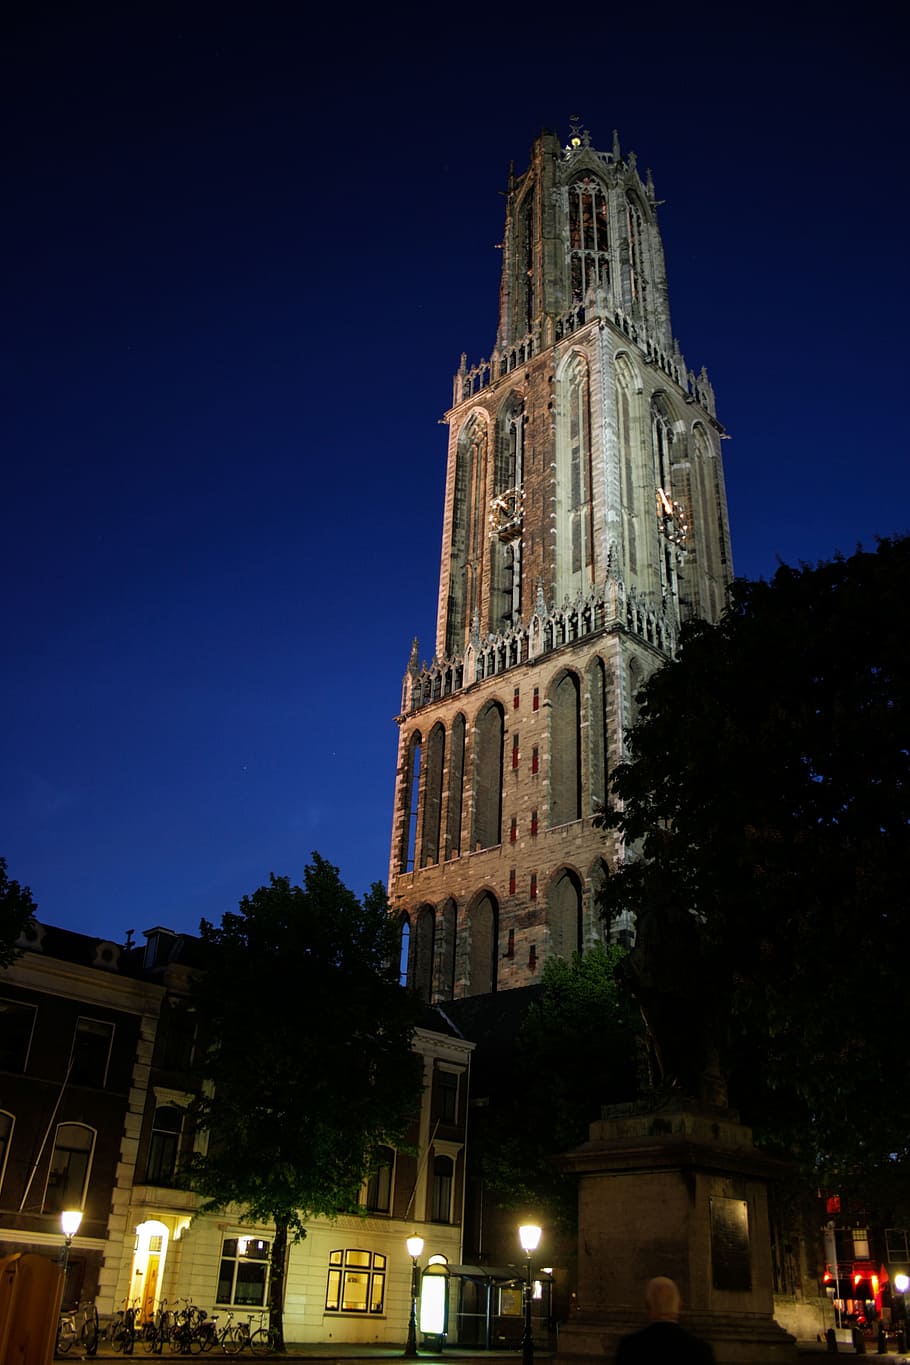 Dom, Dom, Dom Tower, Cathedral Square, dom, utrecht, tower, night, evening, netherlands, building exterior